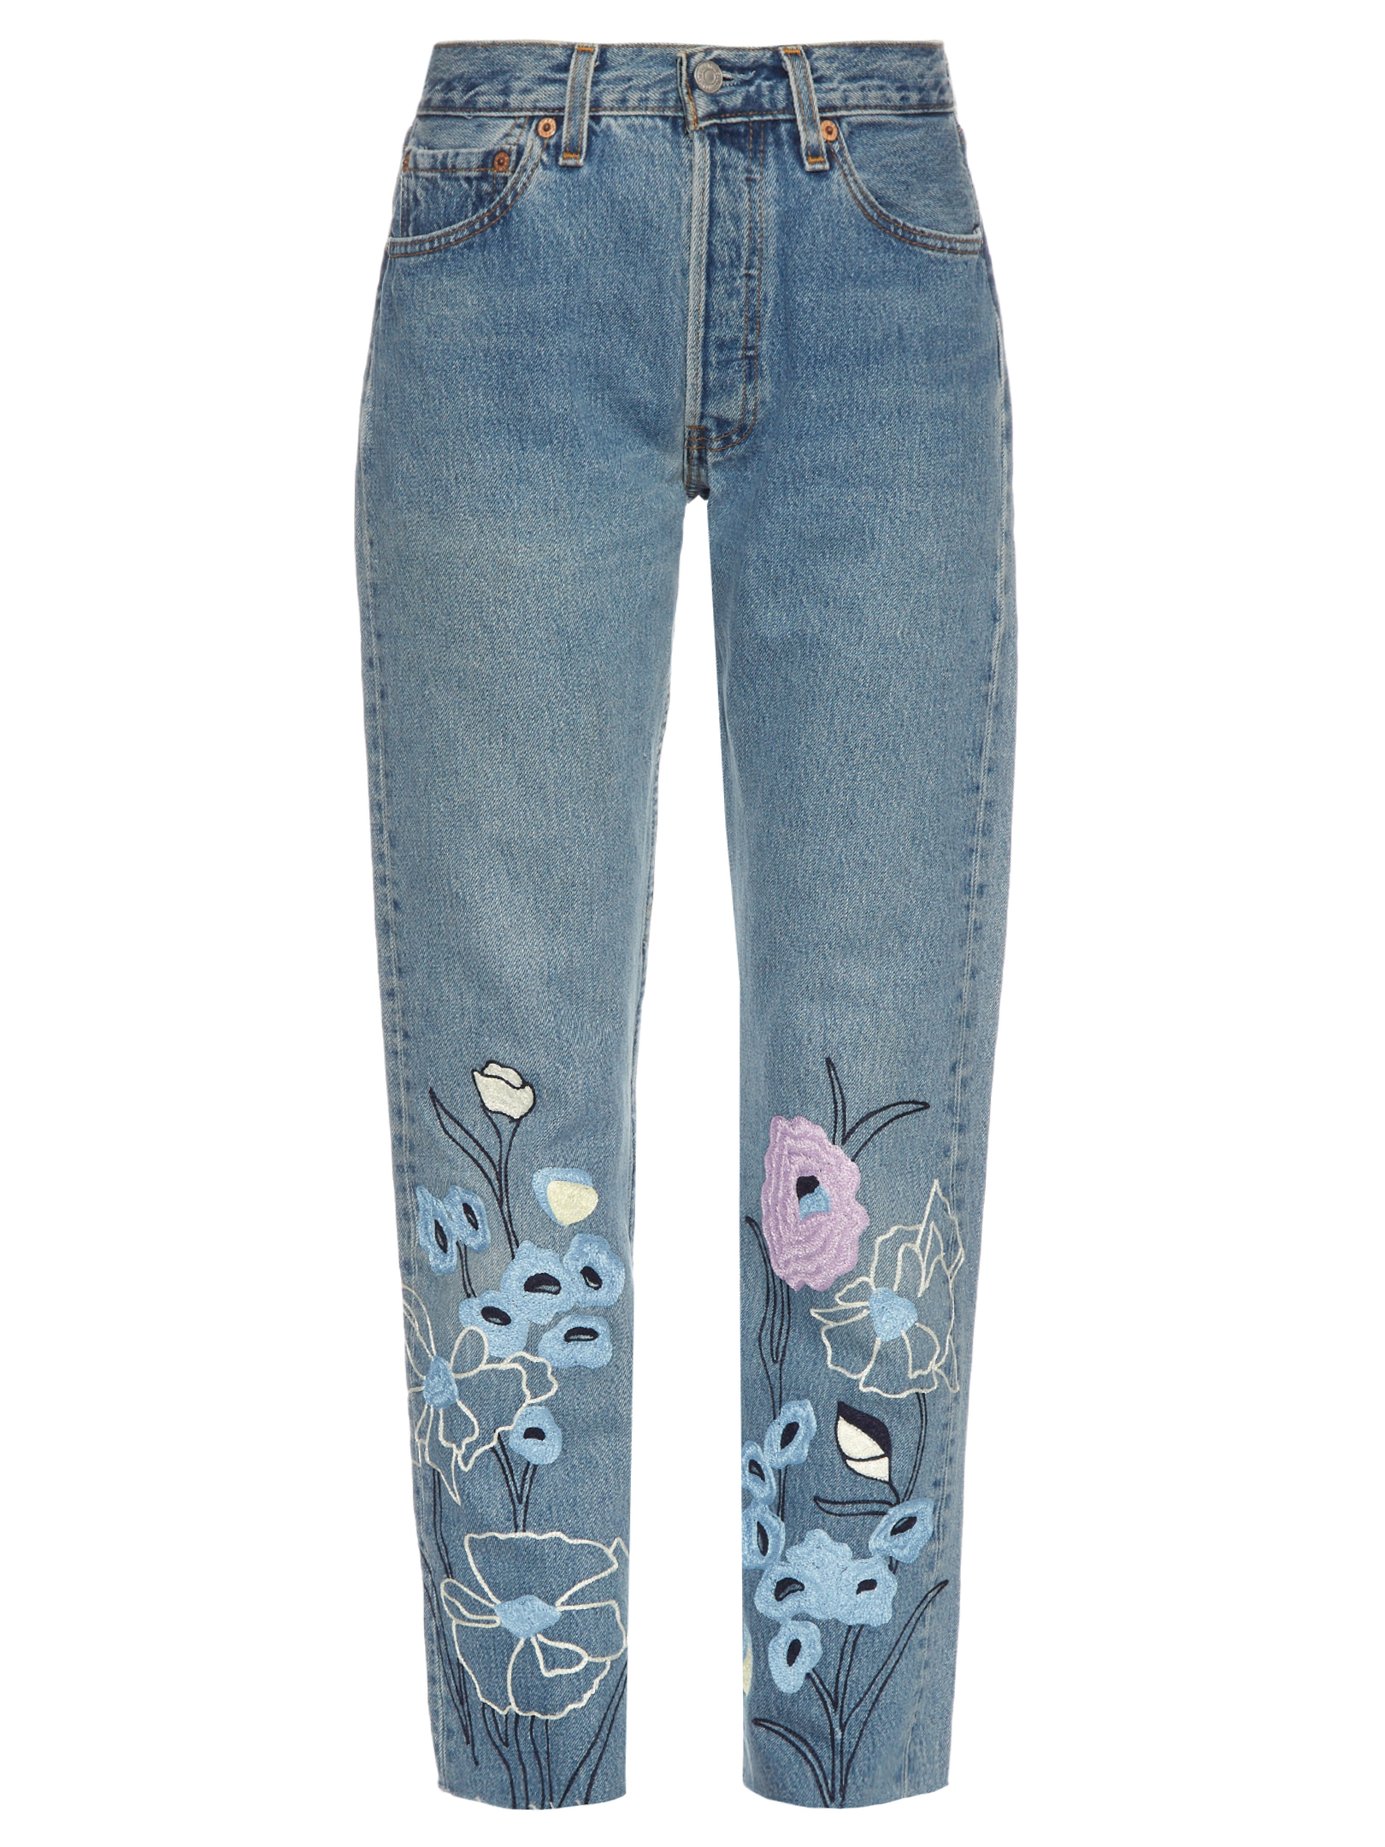 Wild Flower embroidered cropped jeans, $260.0